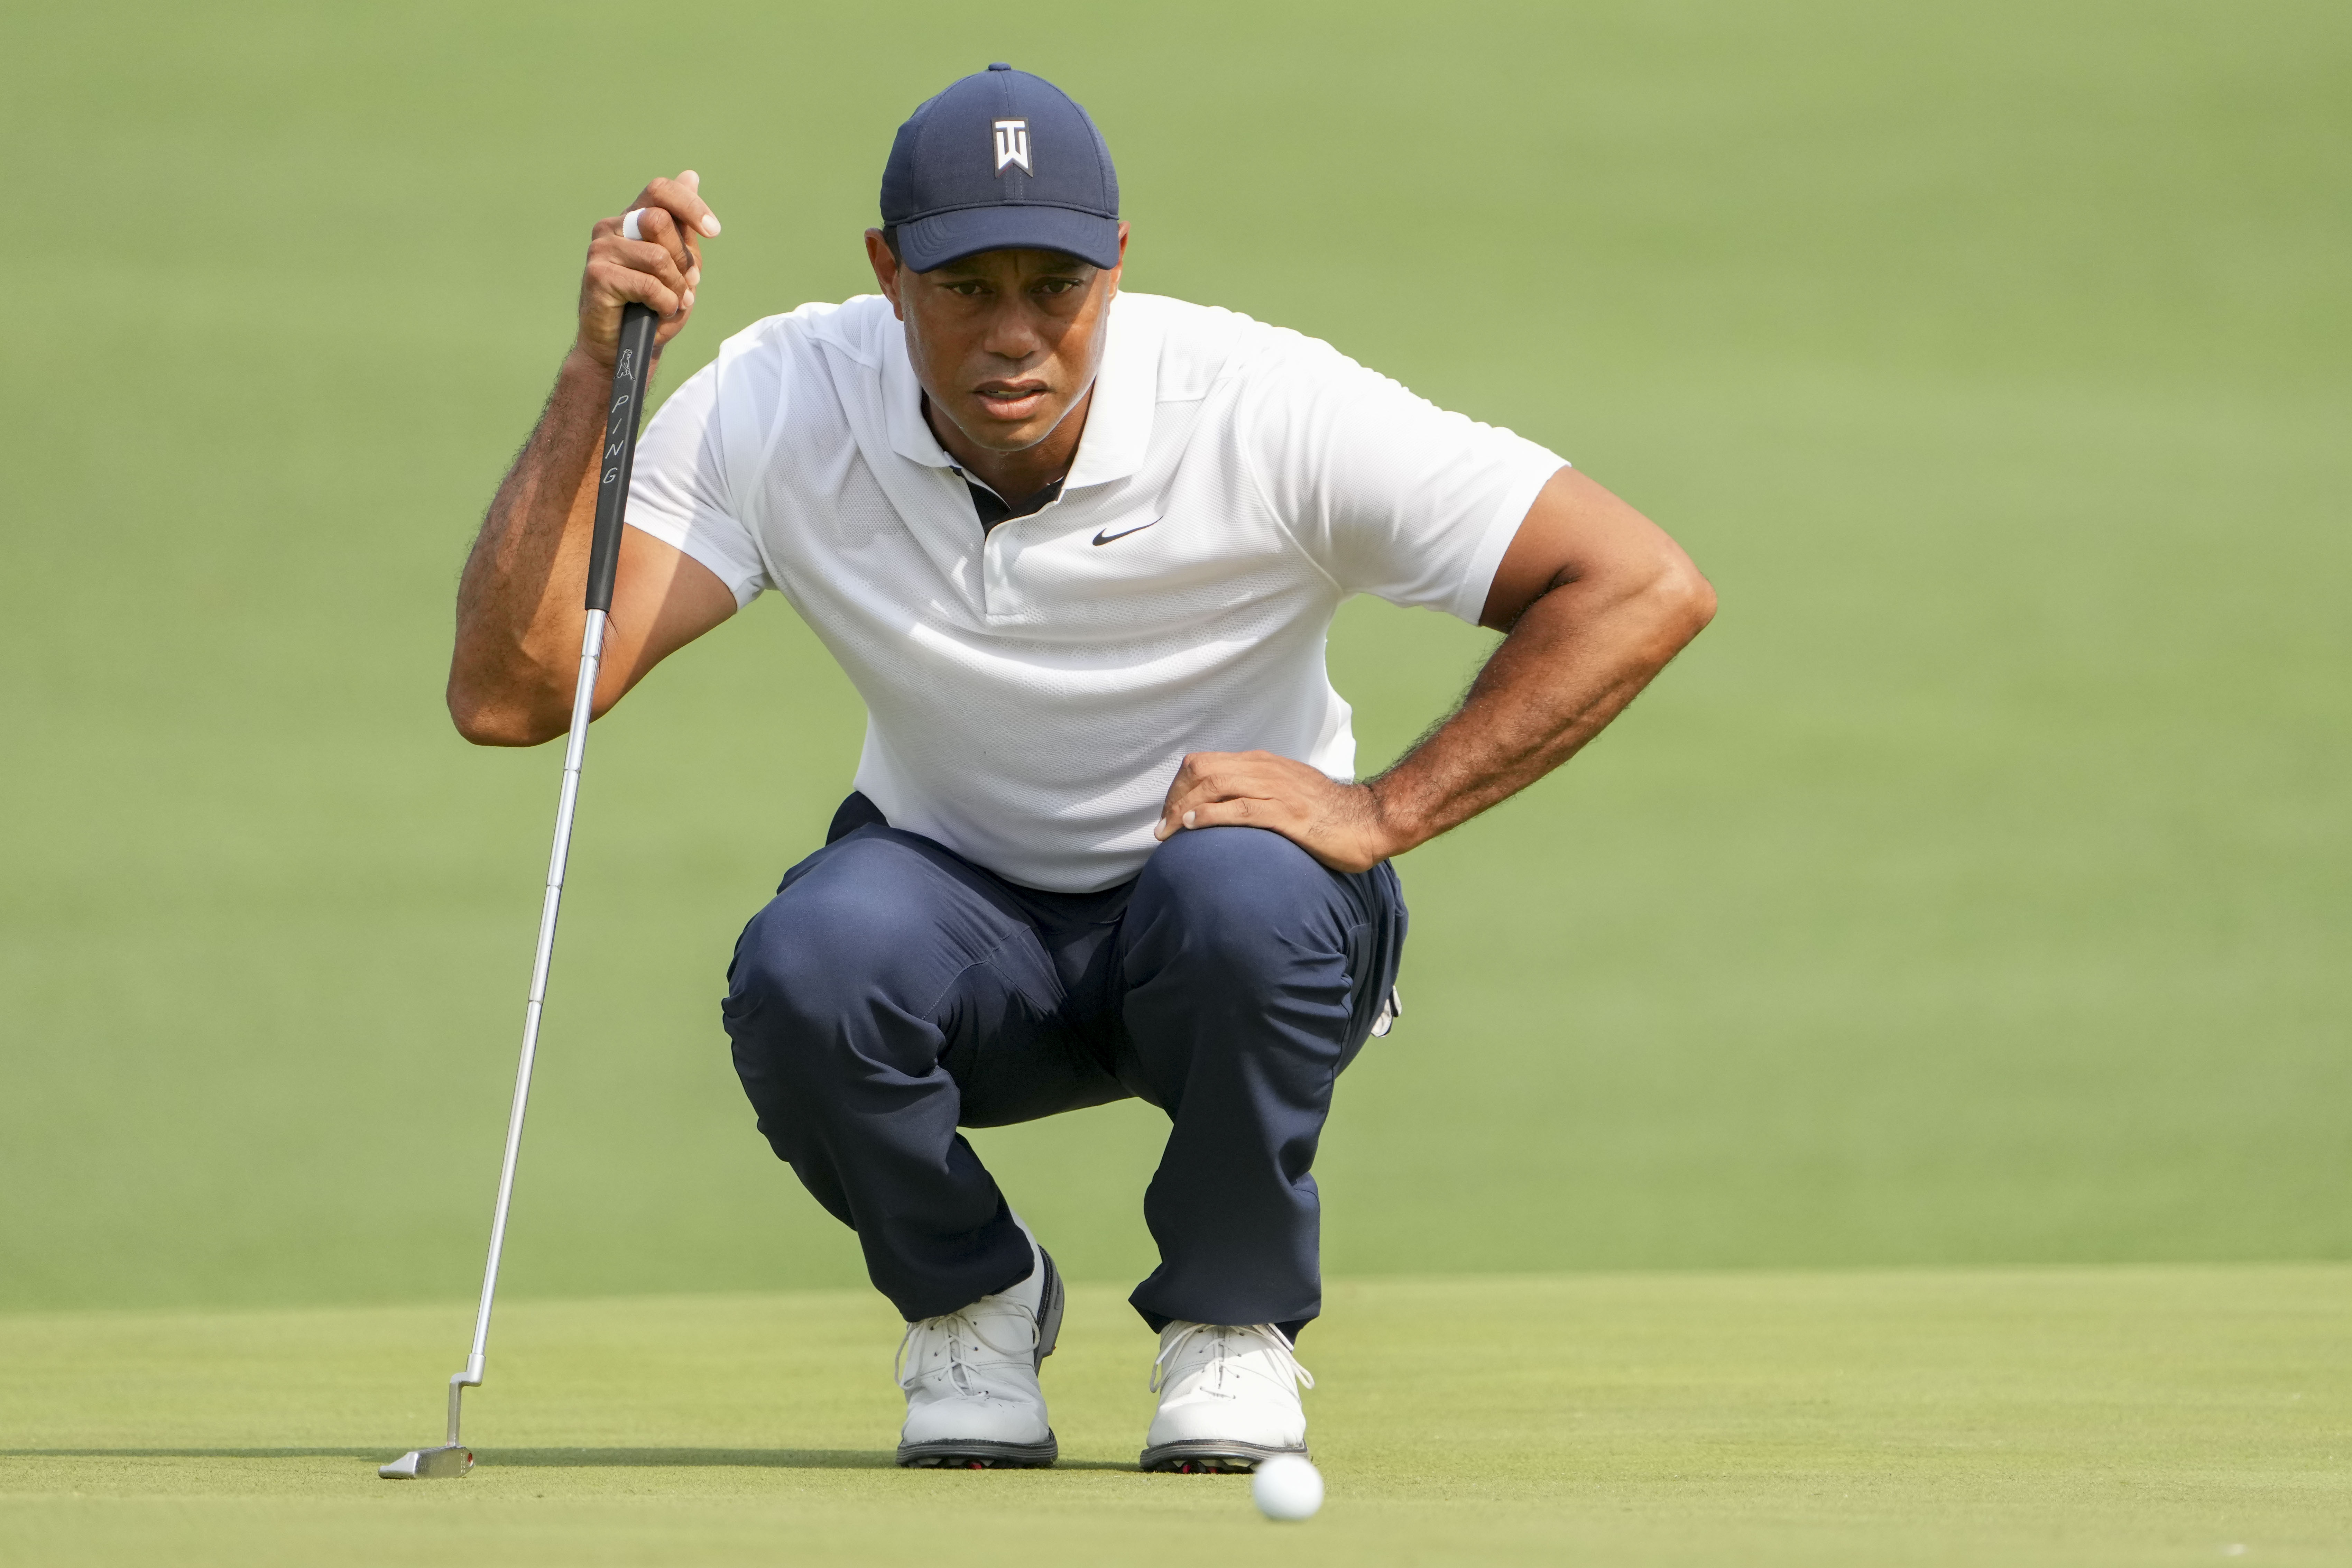 Tiger Woods falters early, finds some form late in ho-hum first round of 2023 Masters